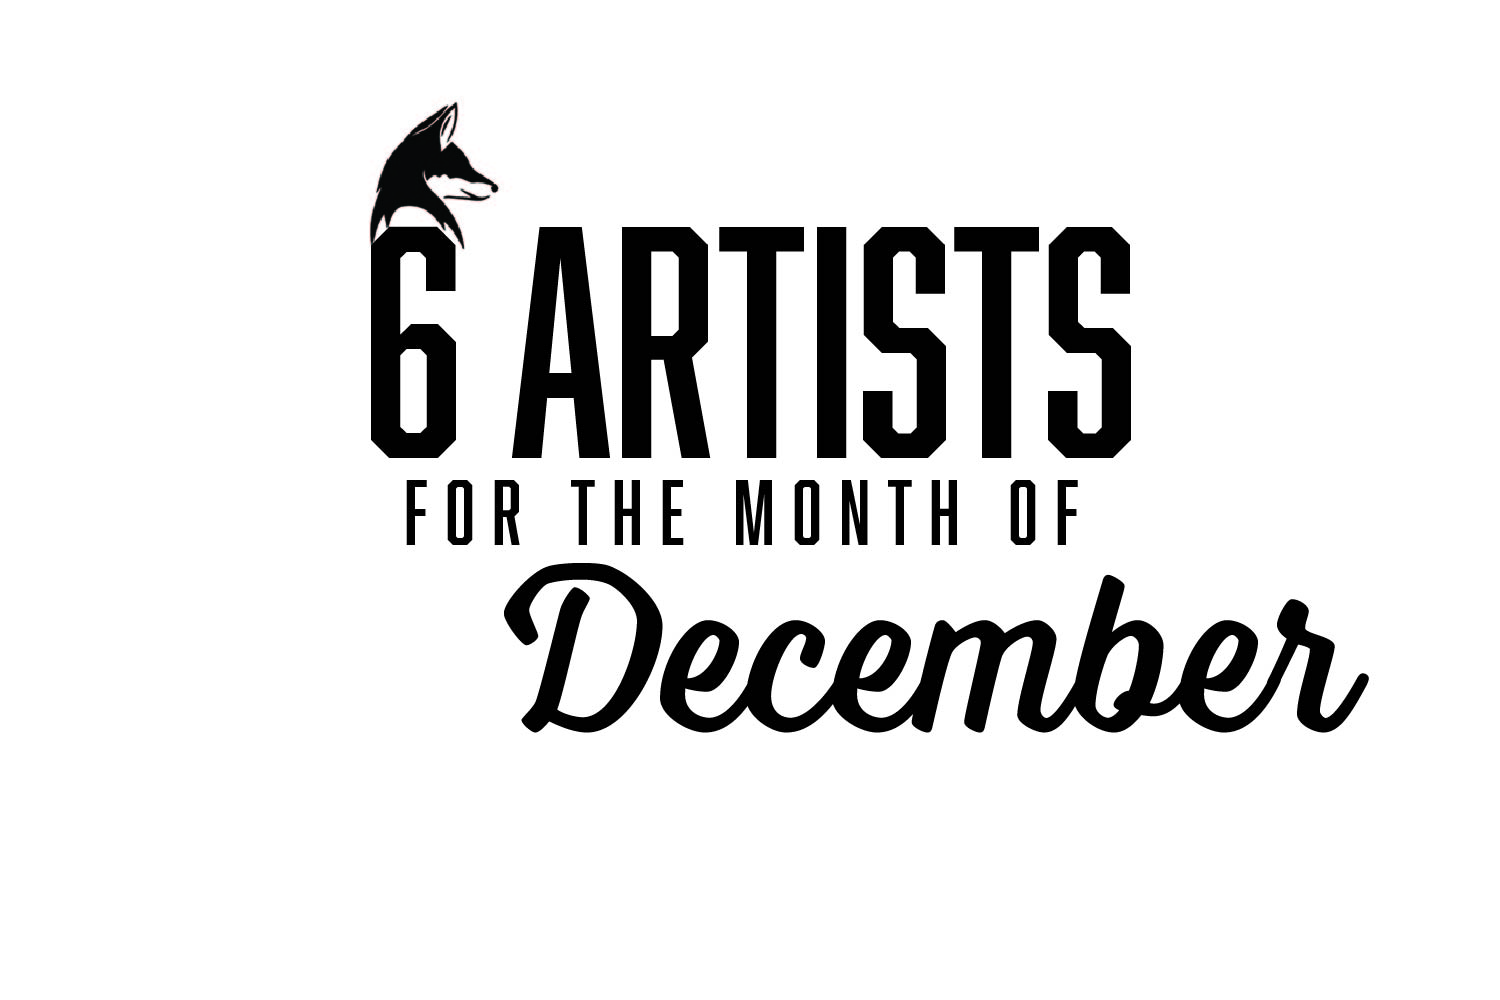 Six Artists You Should Be Listening To: December 2020 EDITION